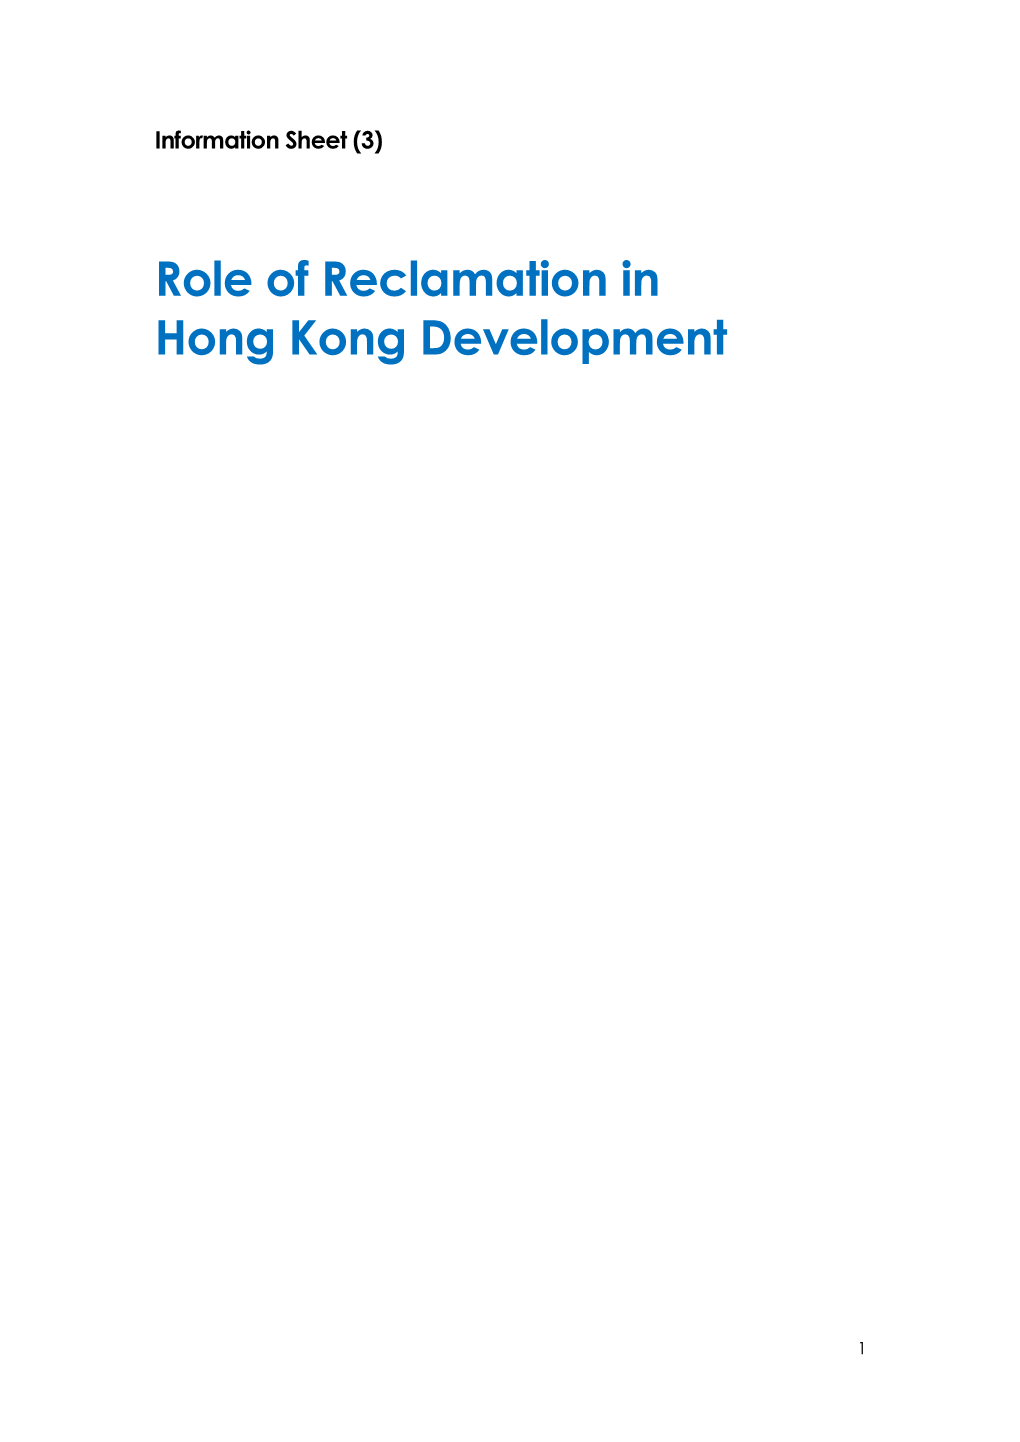 Role of Reclamation in Hong Kong Development